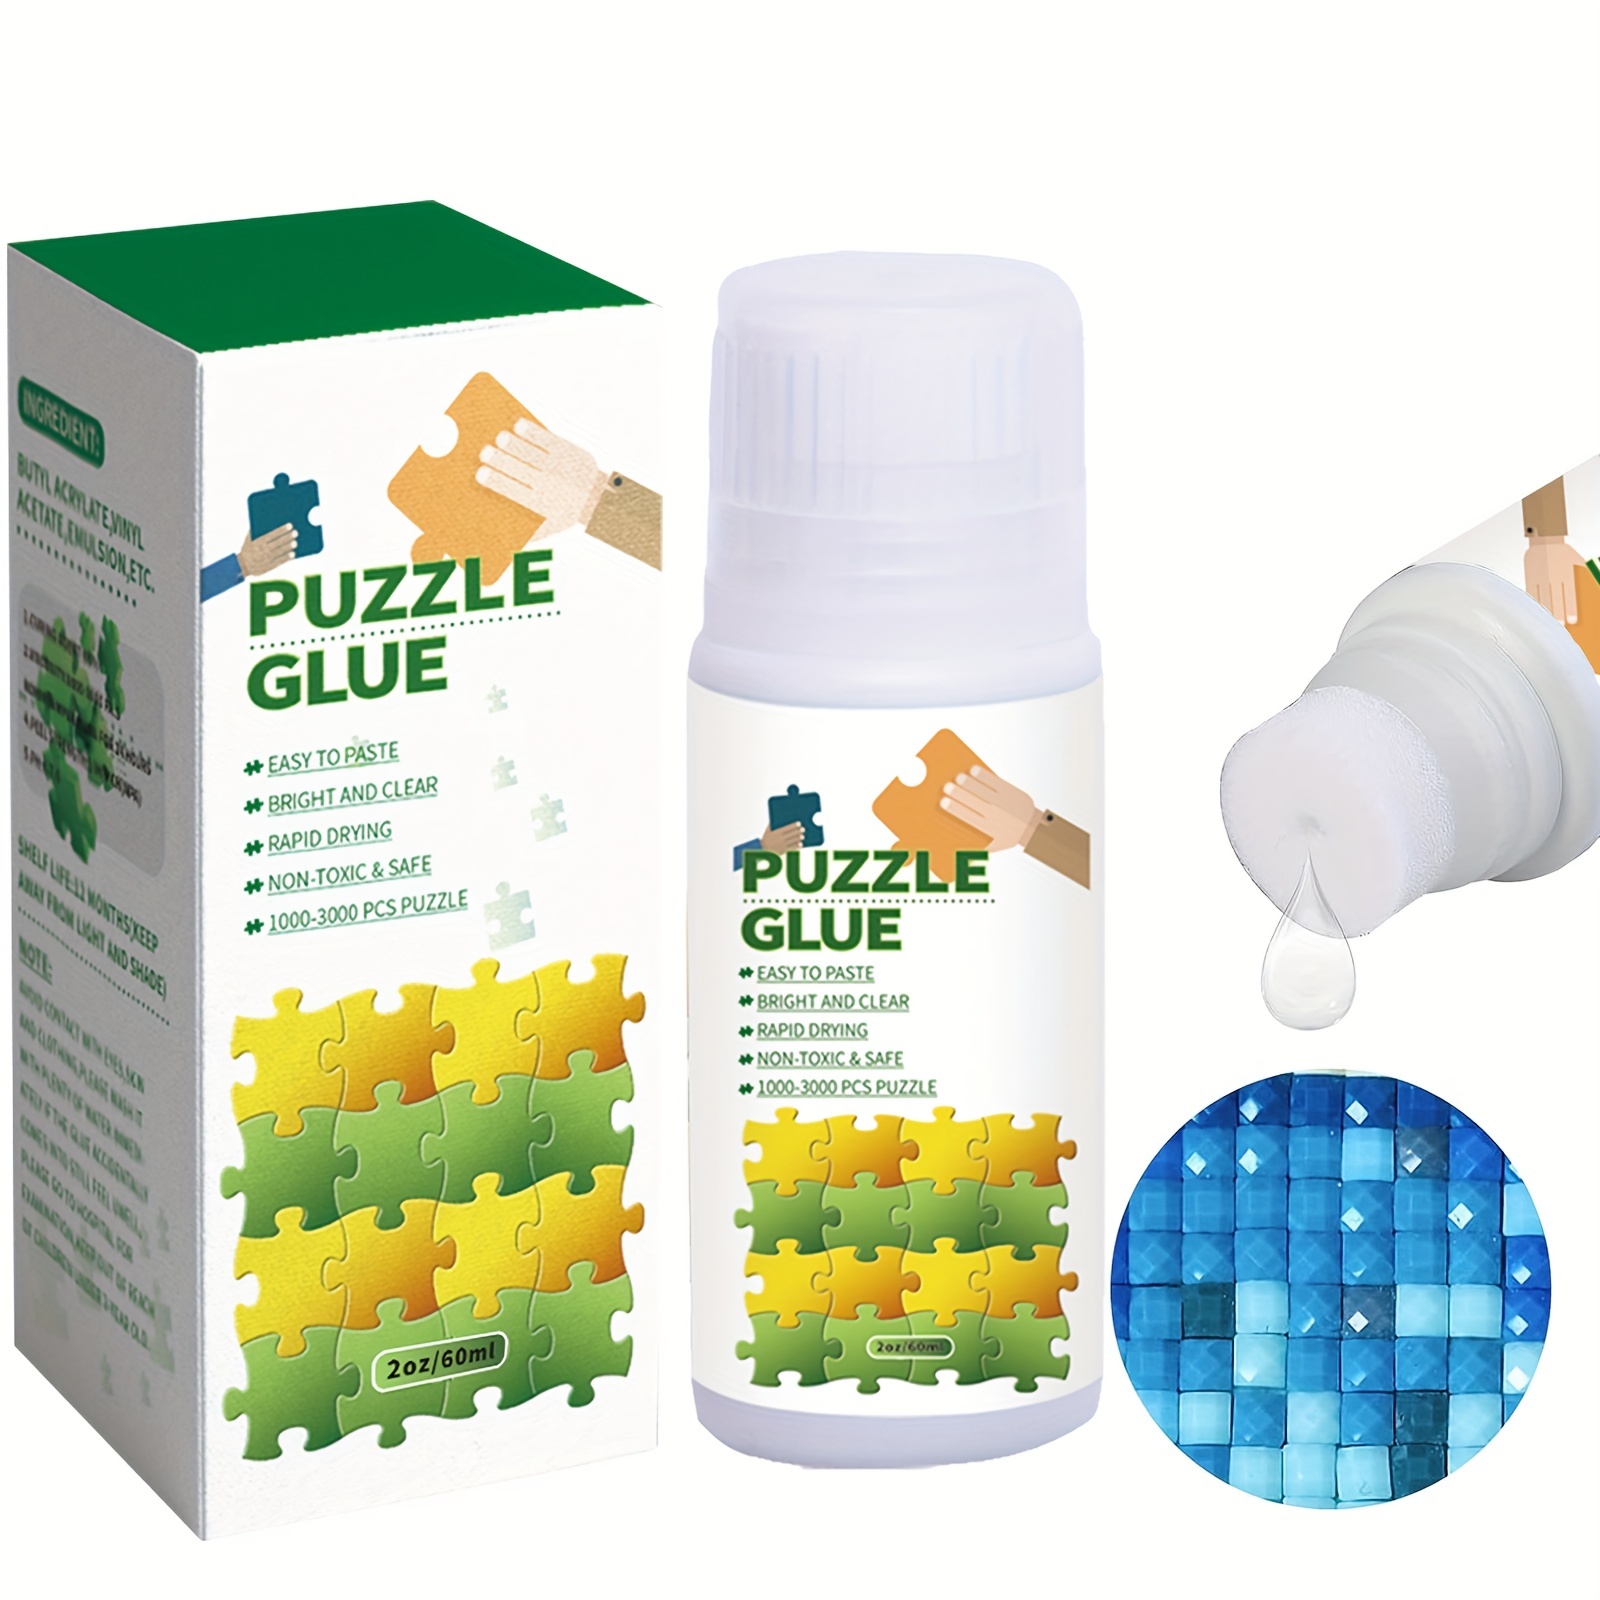 Jigsaw Puzzle Glue Quick Dry for Paper and Wood with Glue Applicator